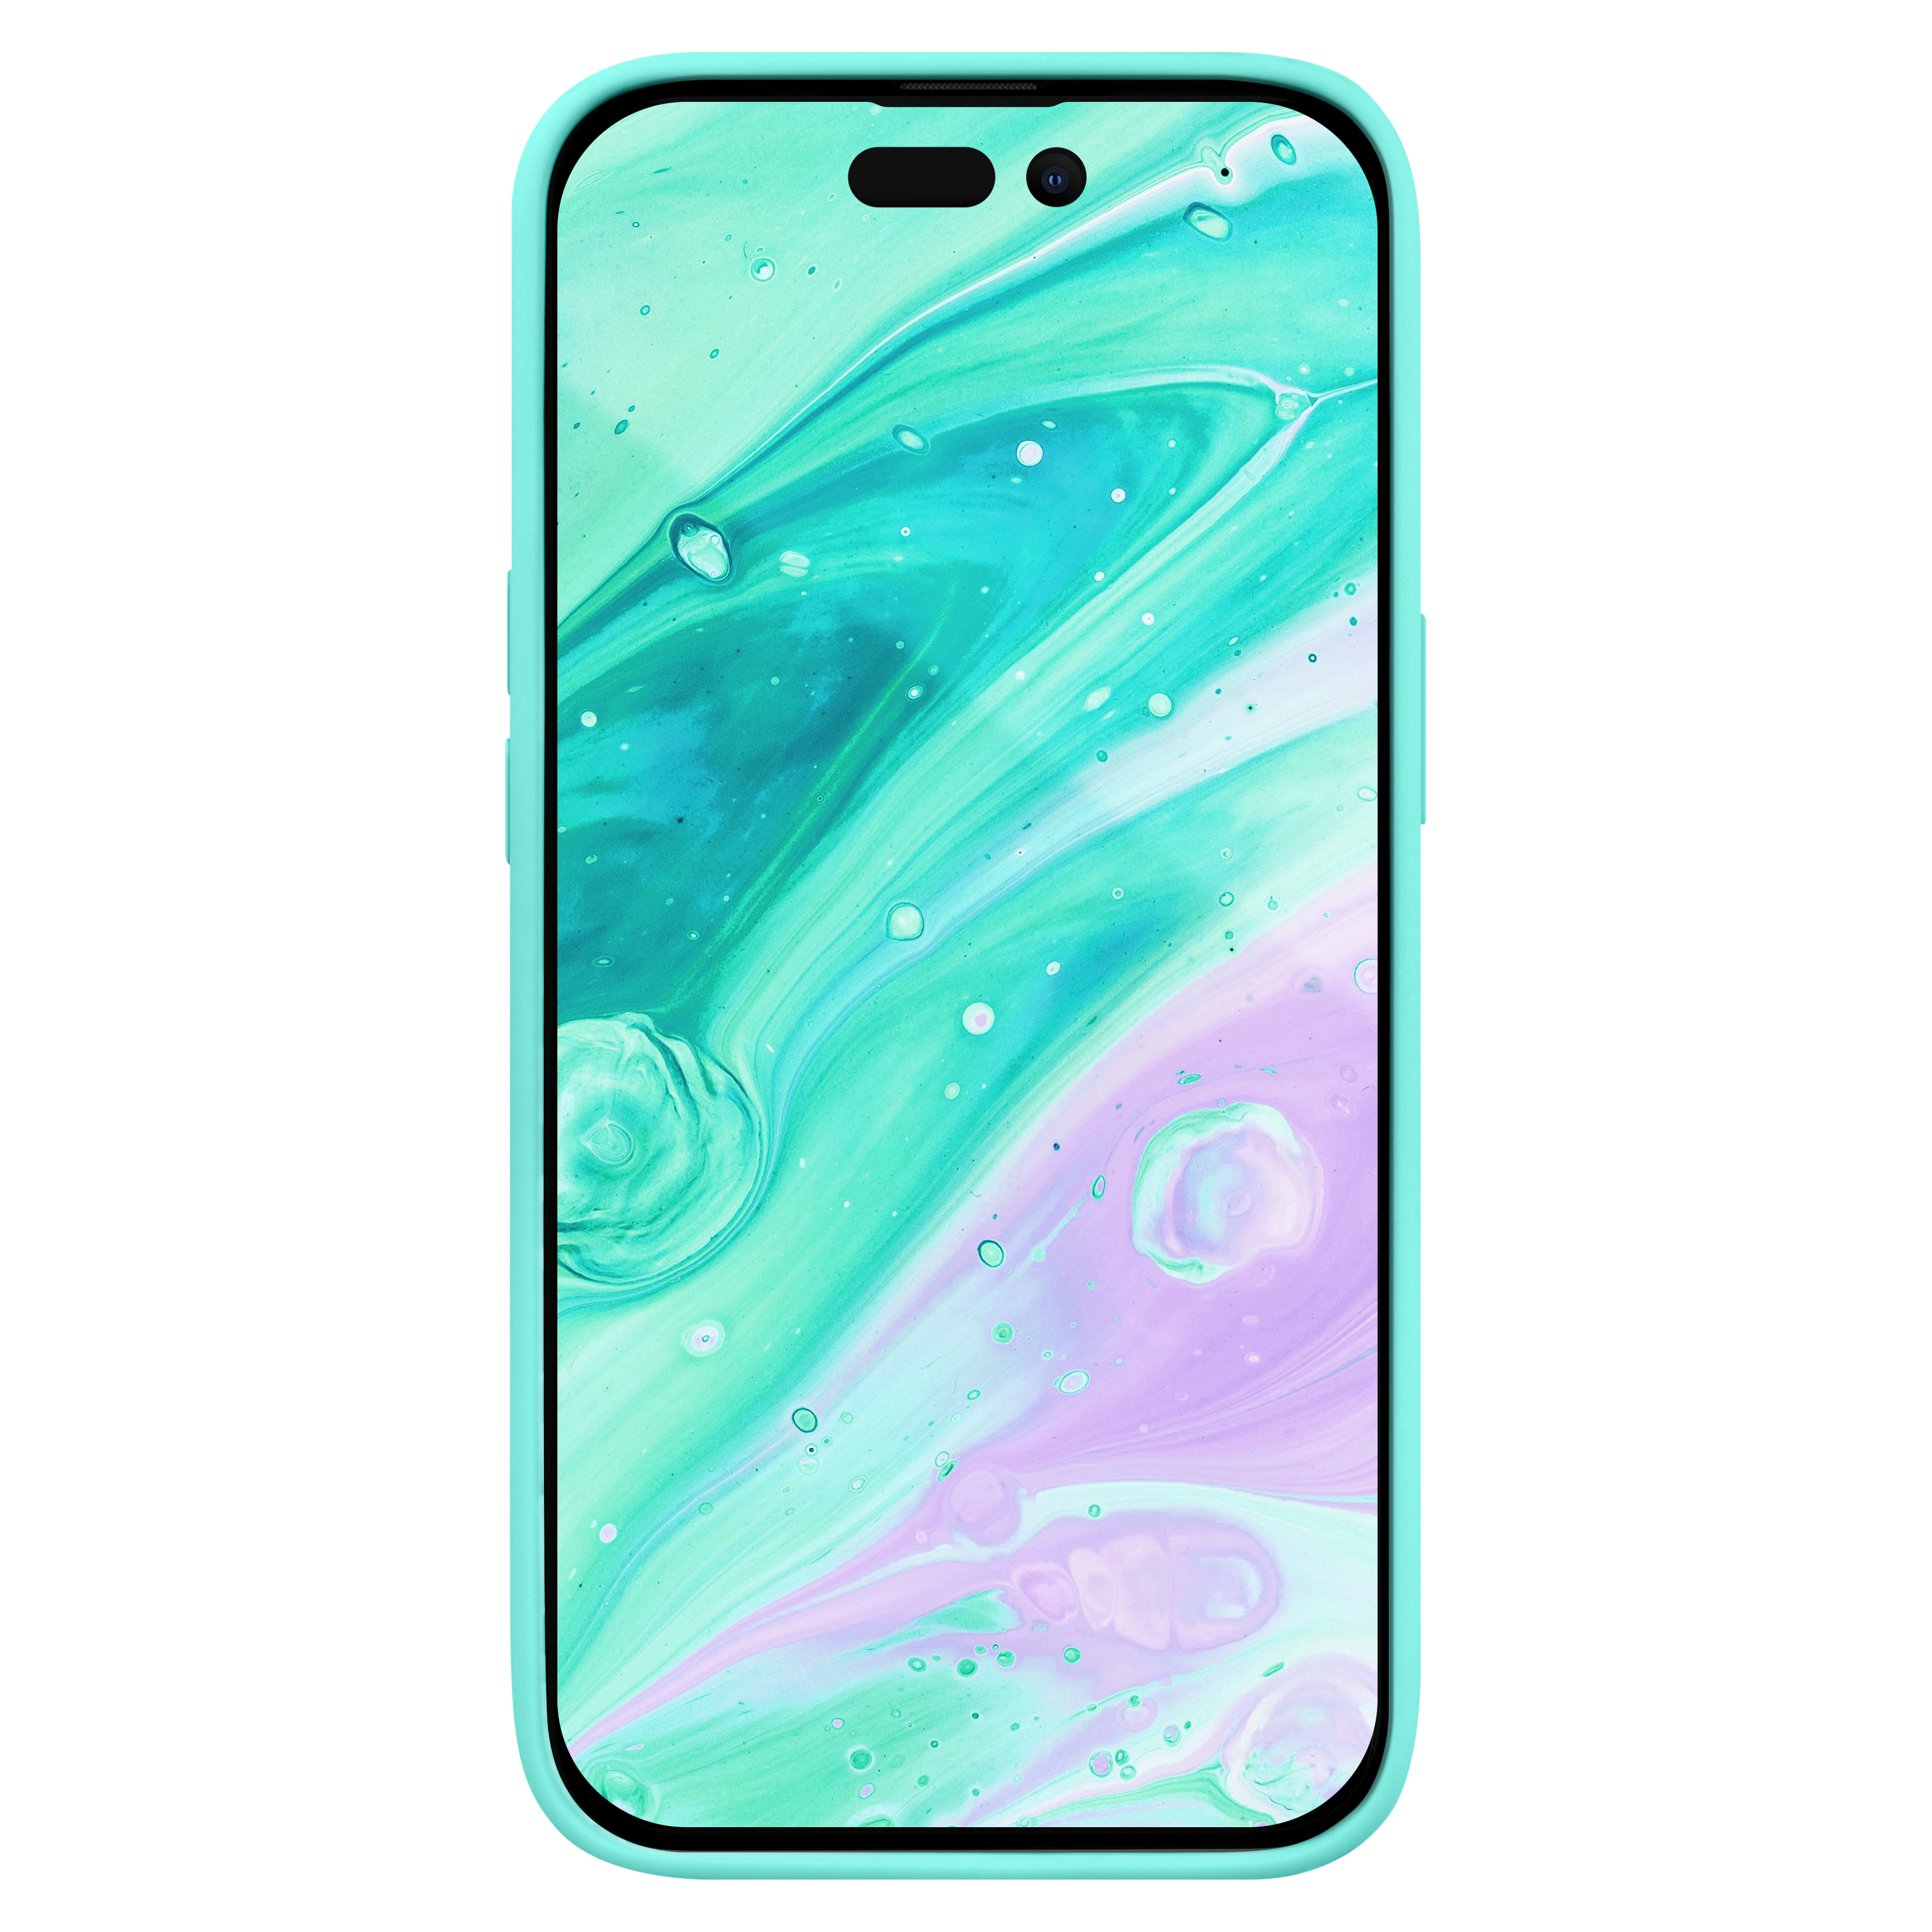 IPHONE Huex Pastels, GREEN2 APPLE, LAUT Backcover, 14 PRO,